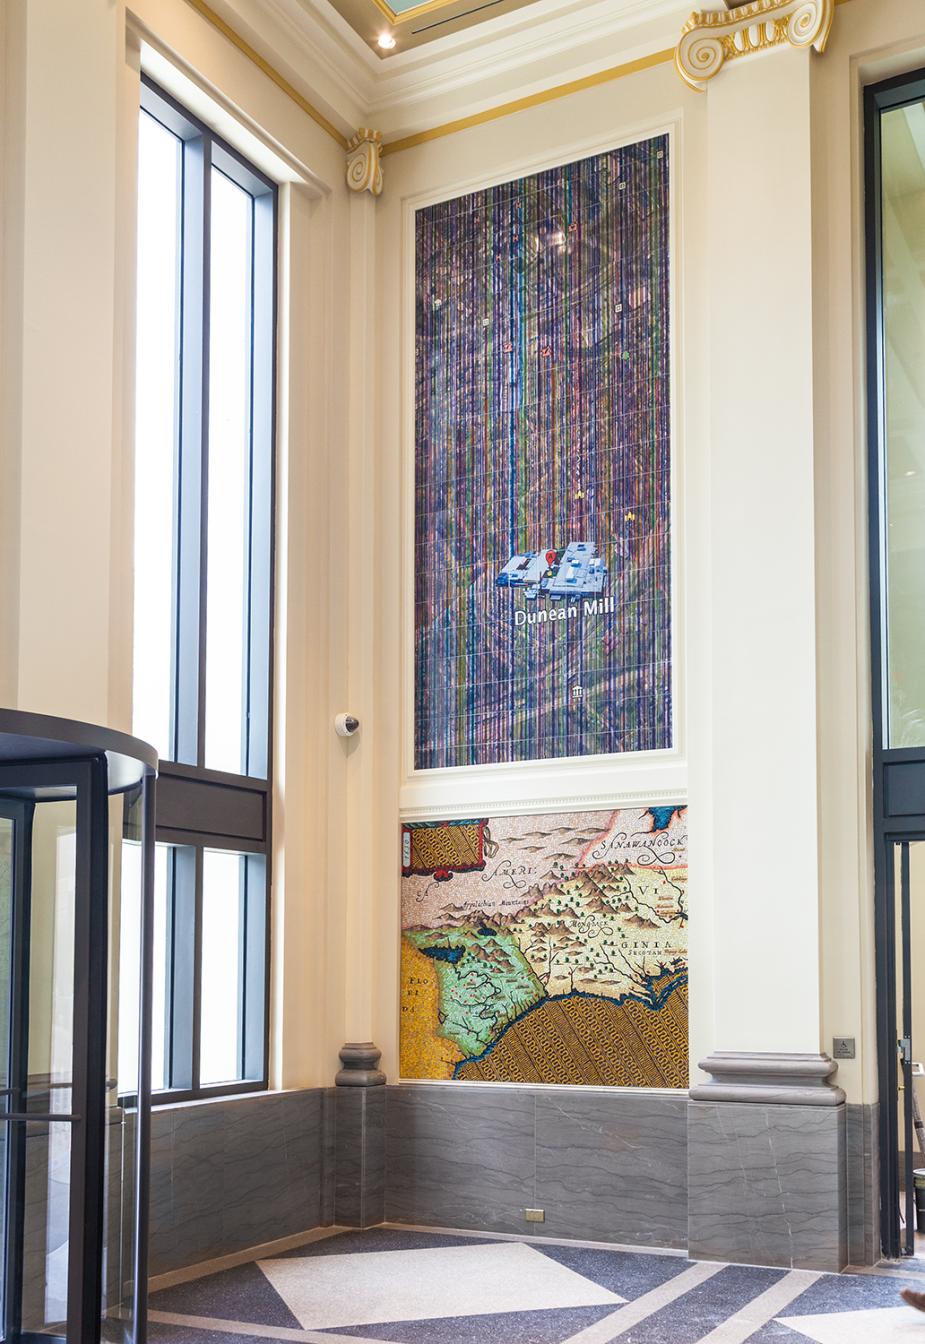 A suite of ceramic tile and glass mosaics that feature present-day Google Earth aerial views of textile mills in communities served by the courthouse.